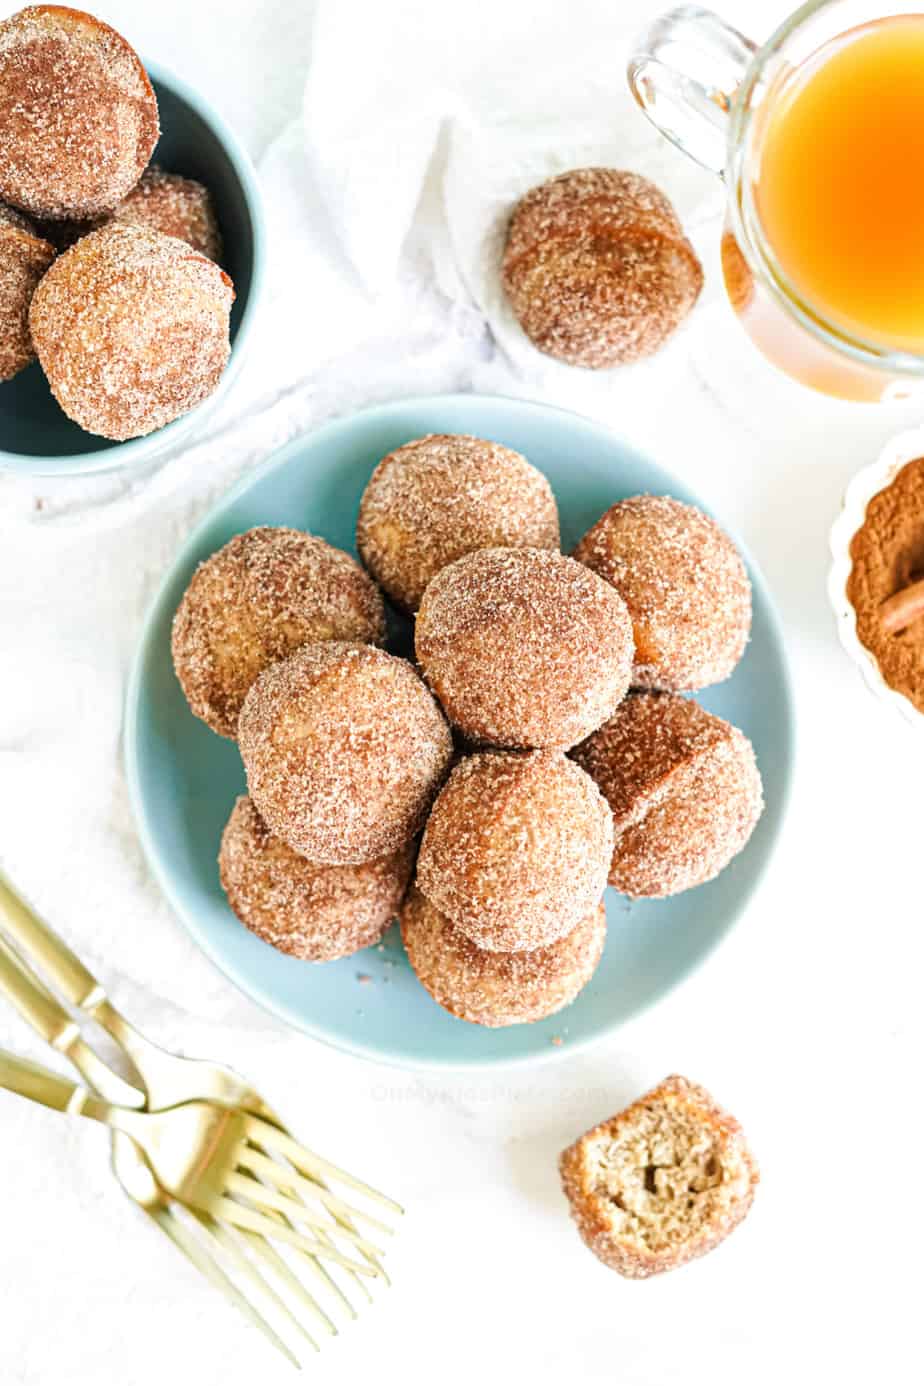 Plate of doughnut holes covered in cinnamon sugar from overhead with a glass of apple cider, forks and a second bowl of doughnut holes nearby on the table